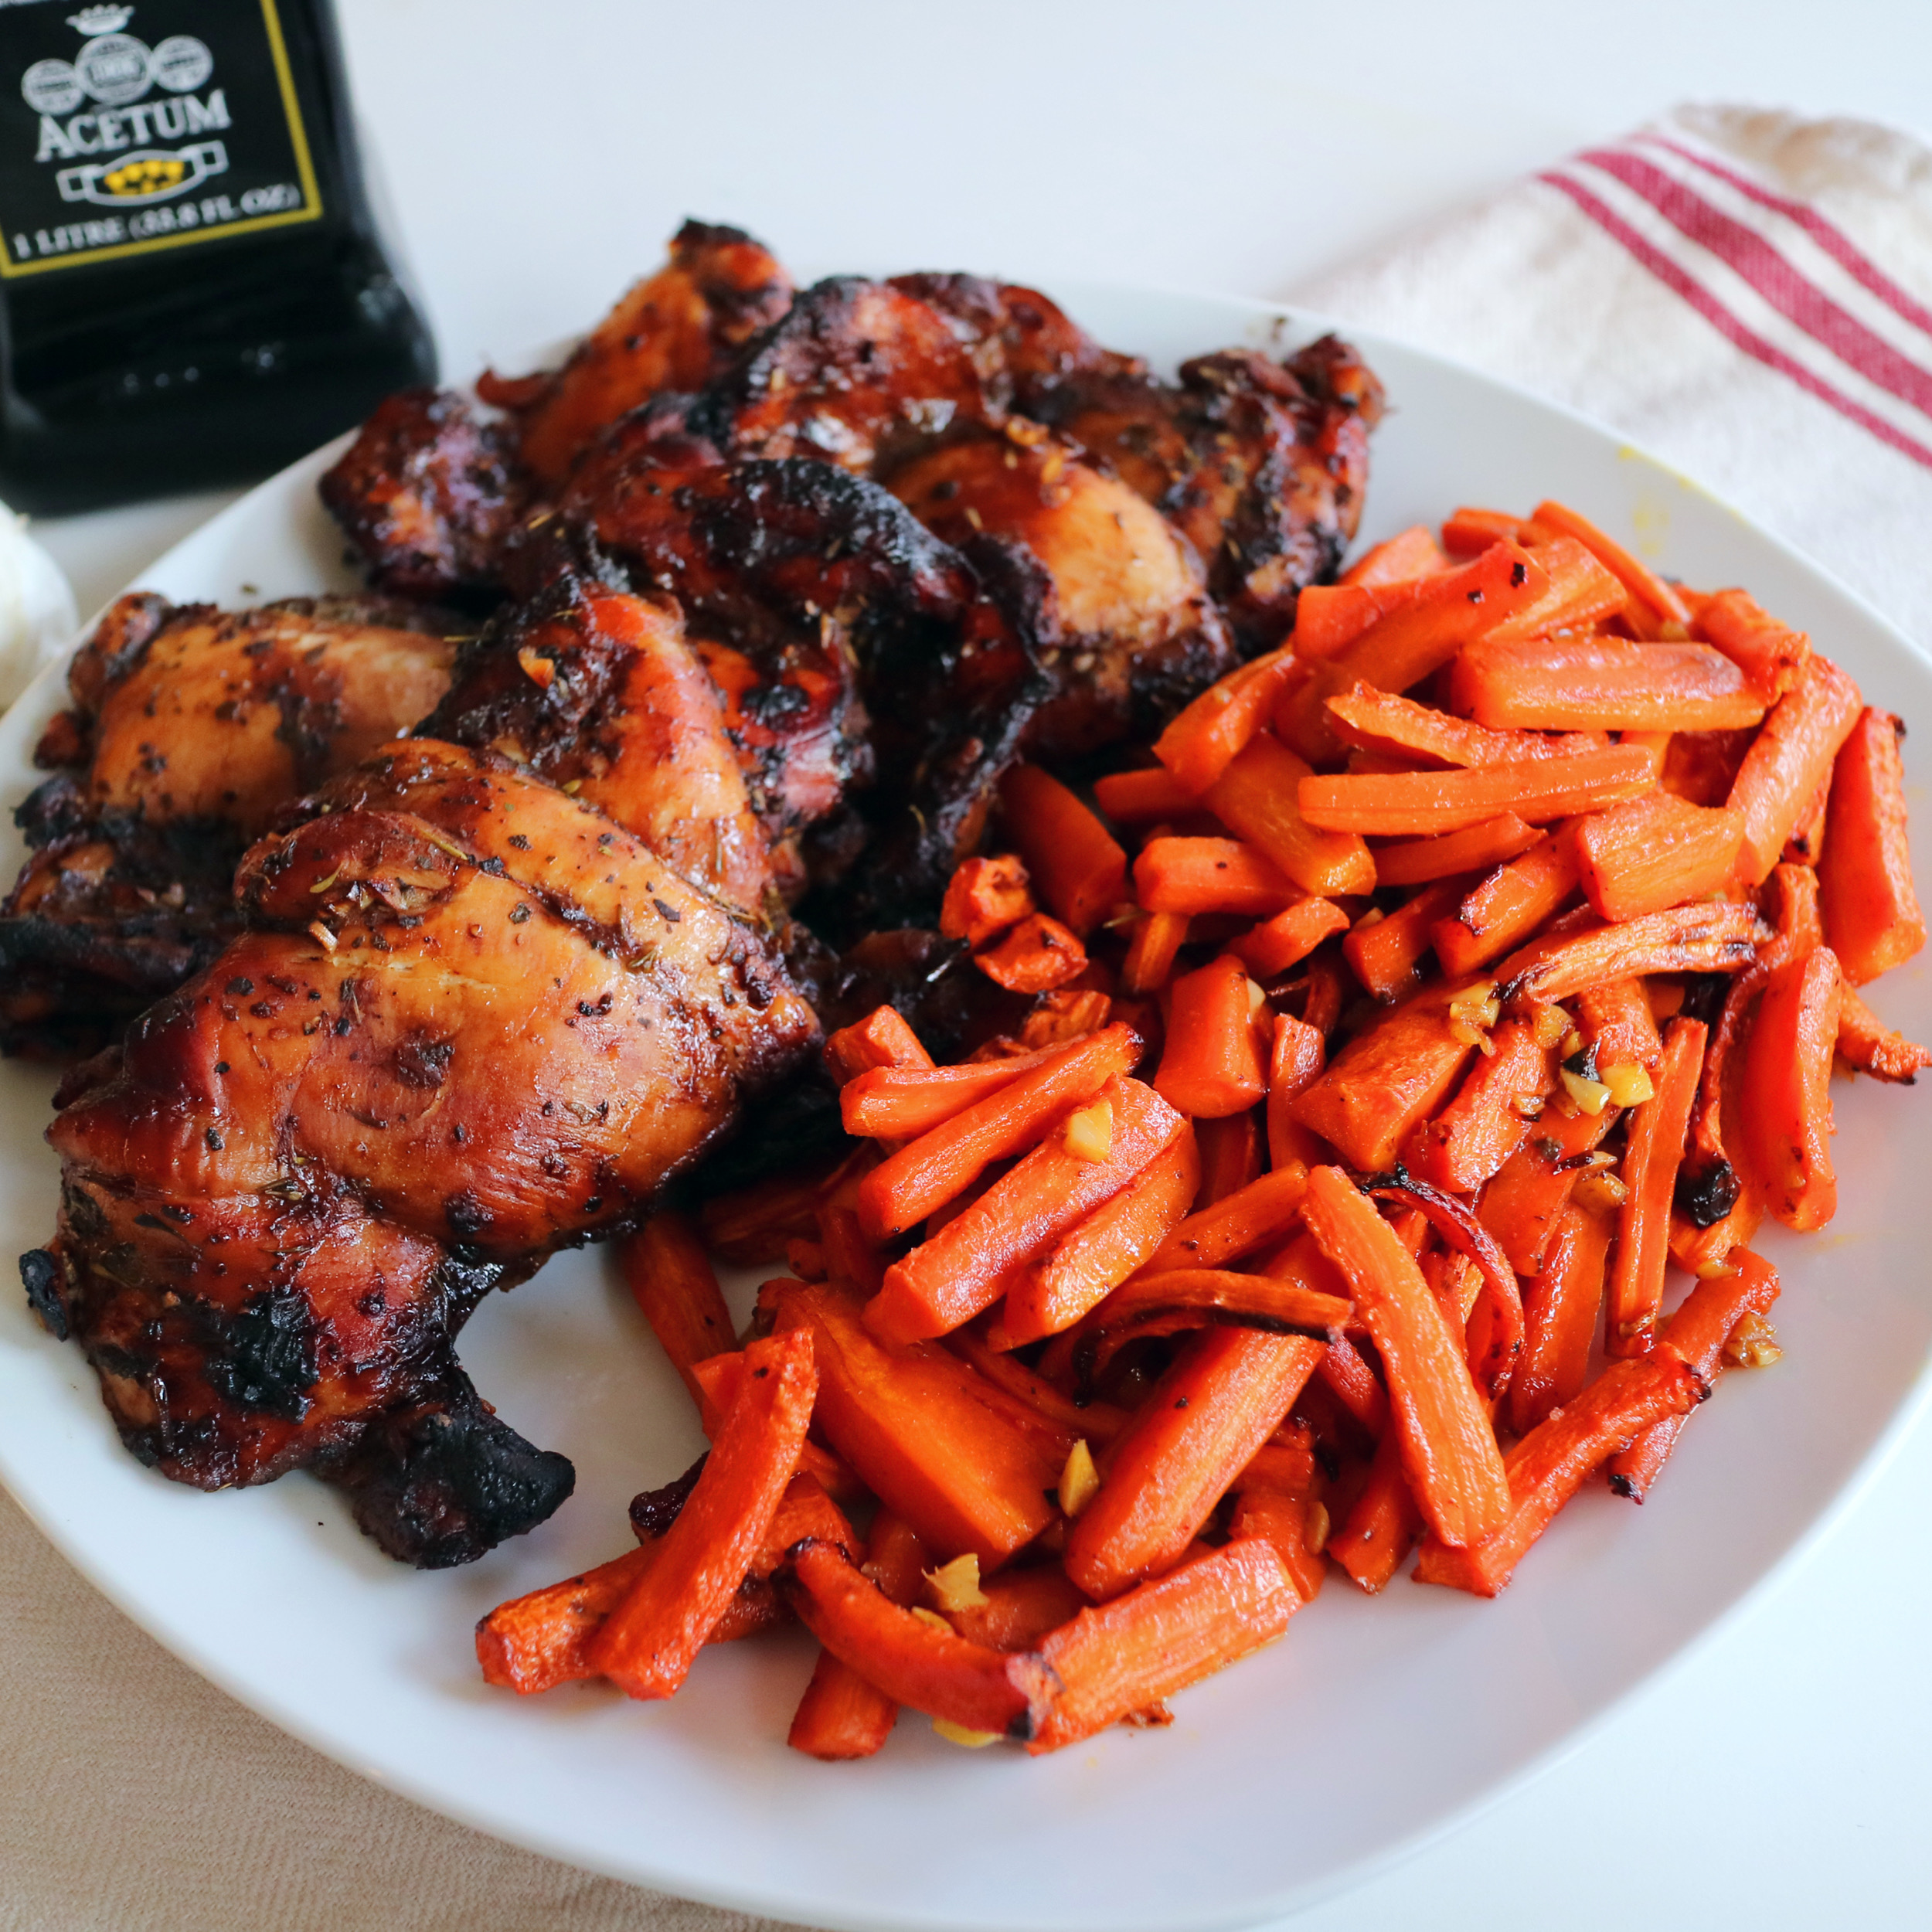 Roasted balsamic chicken with buttery roasted carrots and garlic